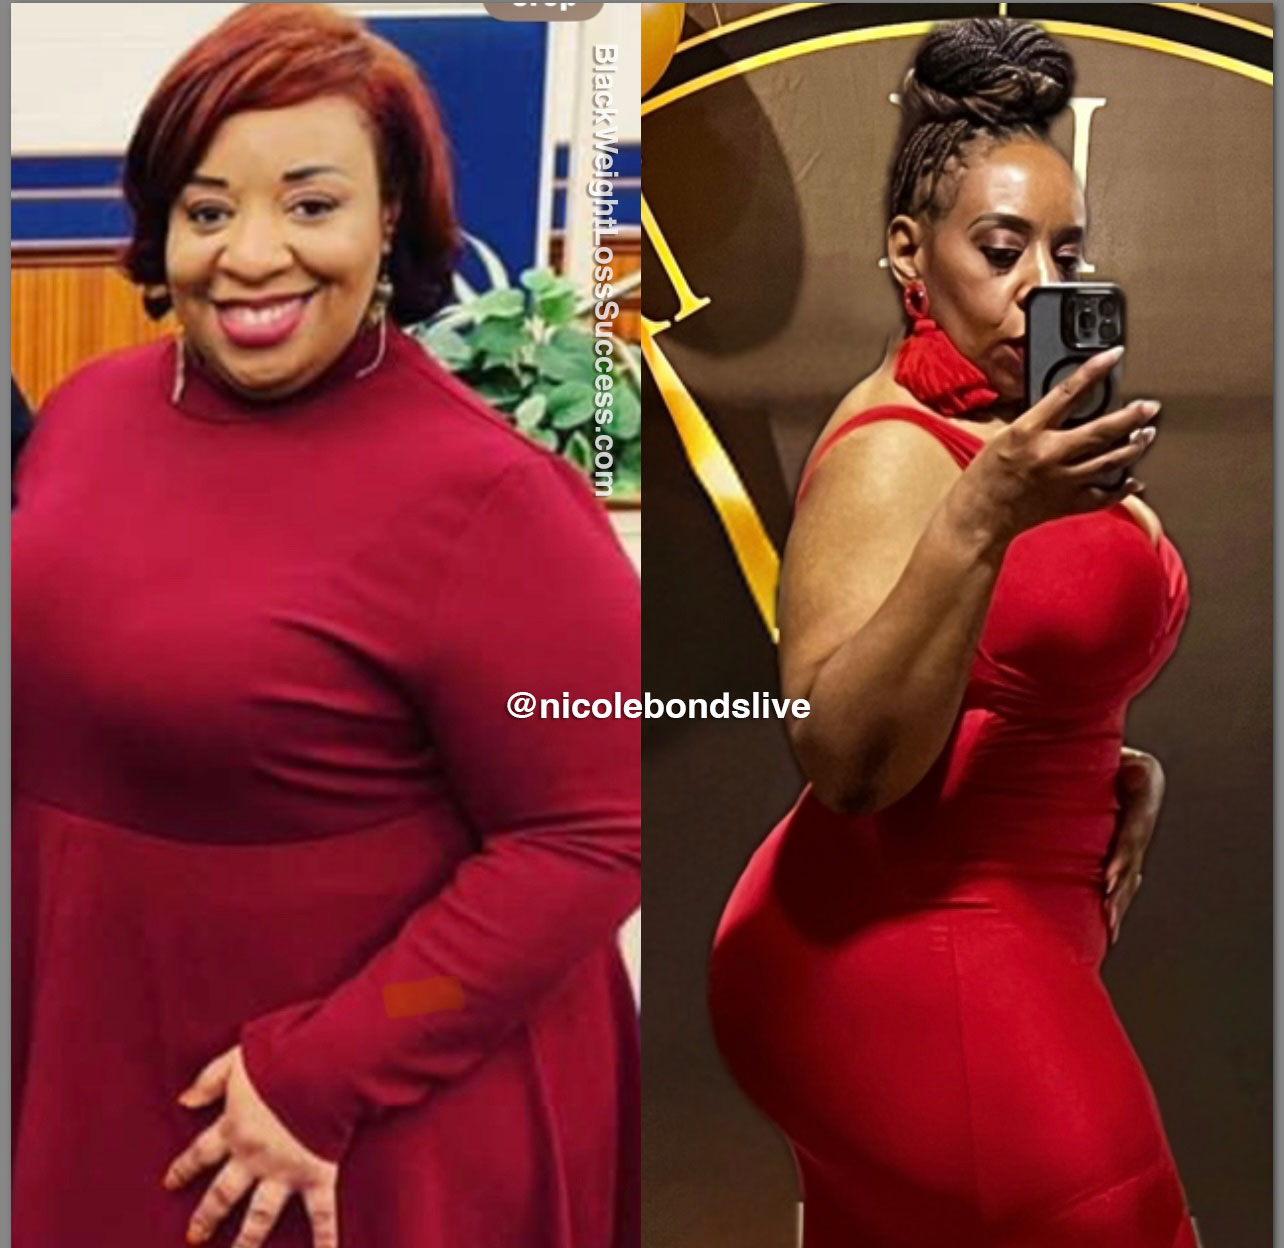 Nicole before and after weight loss